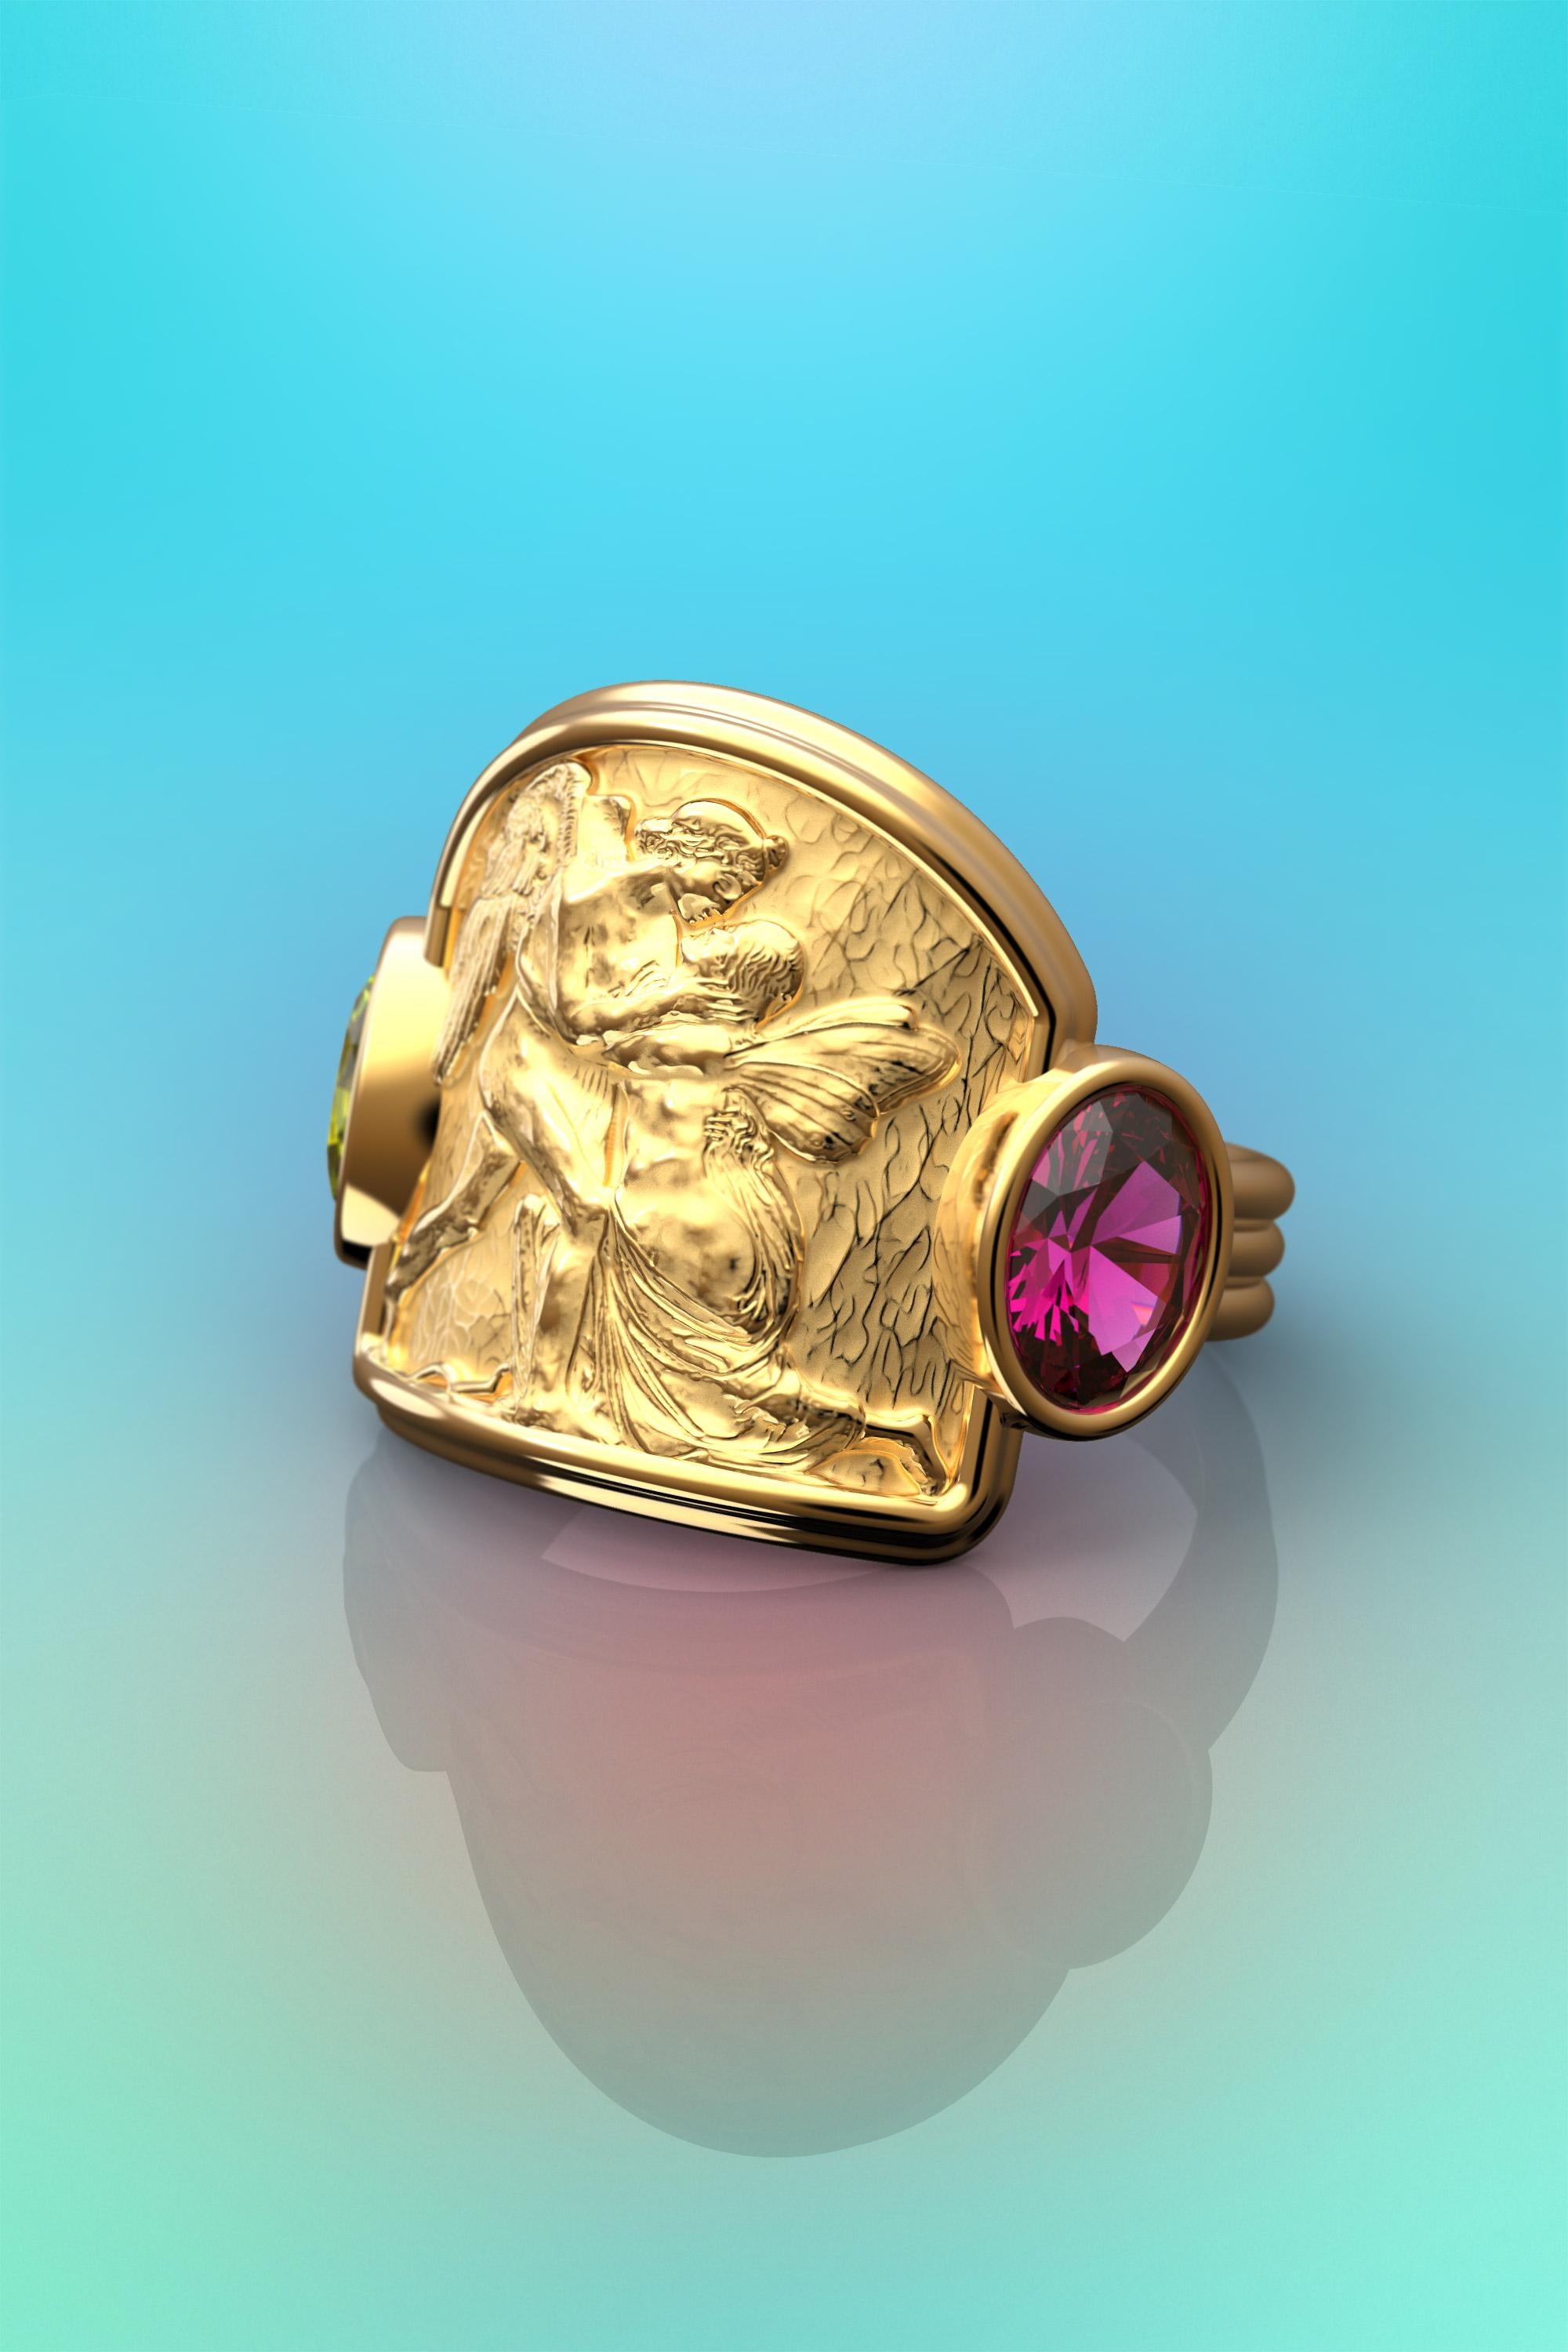 For Sale:  Oltremare Gioielli Sculptural Ring, Love and Psyche 18k Gold Ring, Italian Gold 2